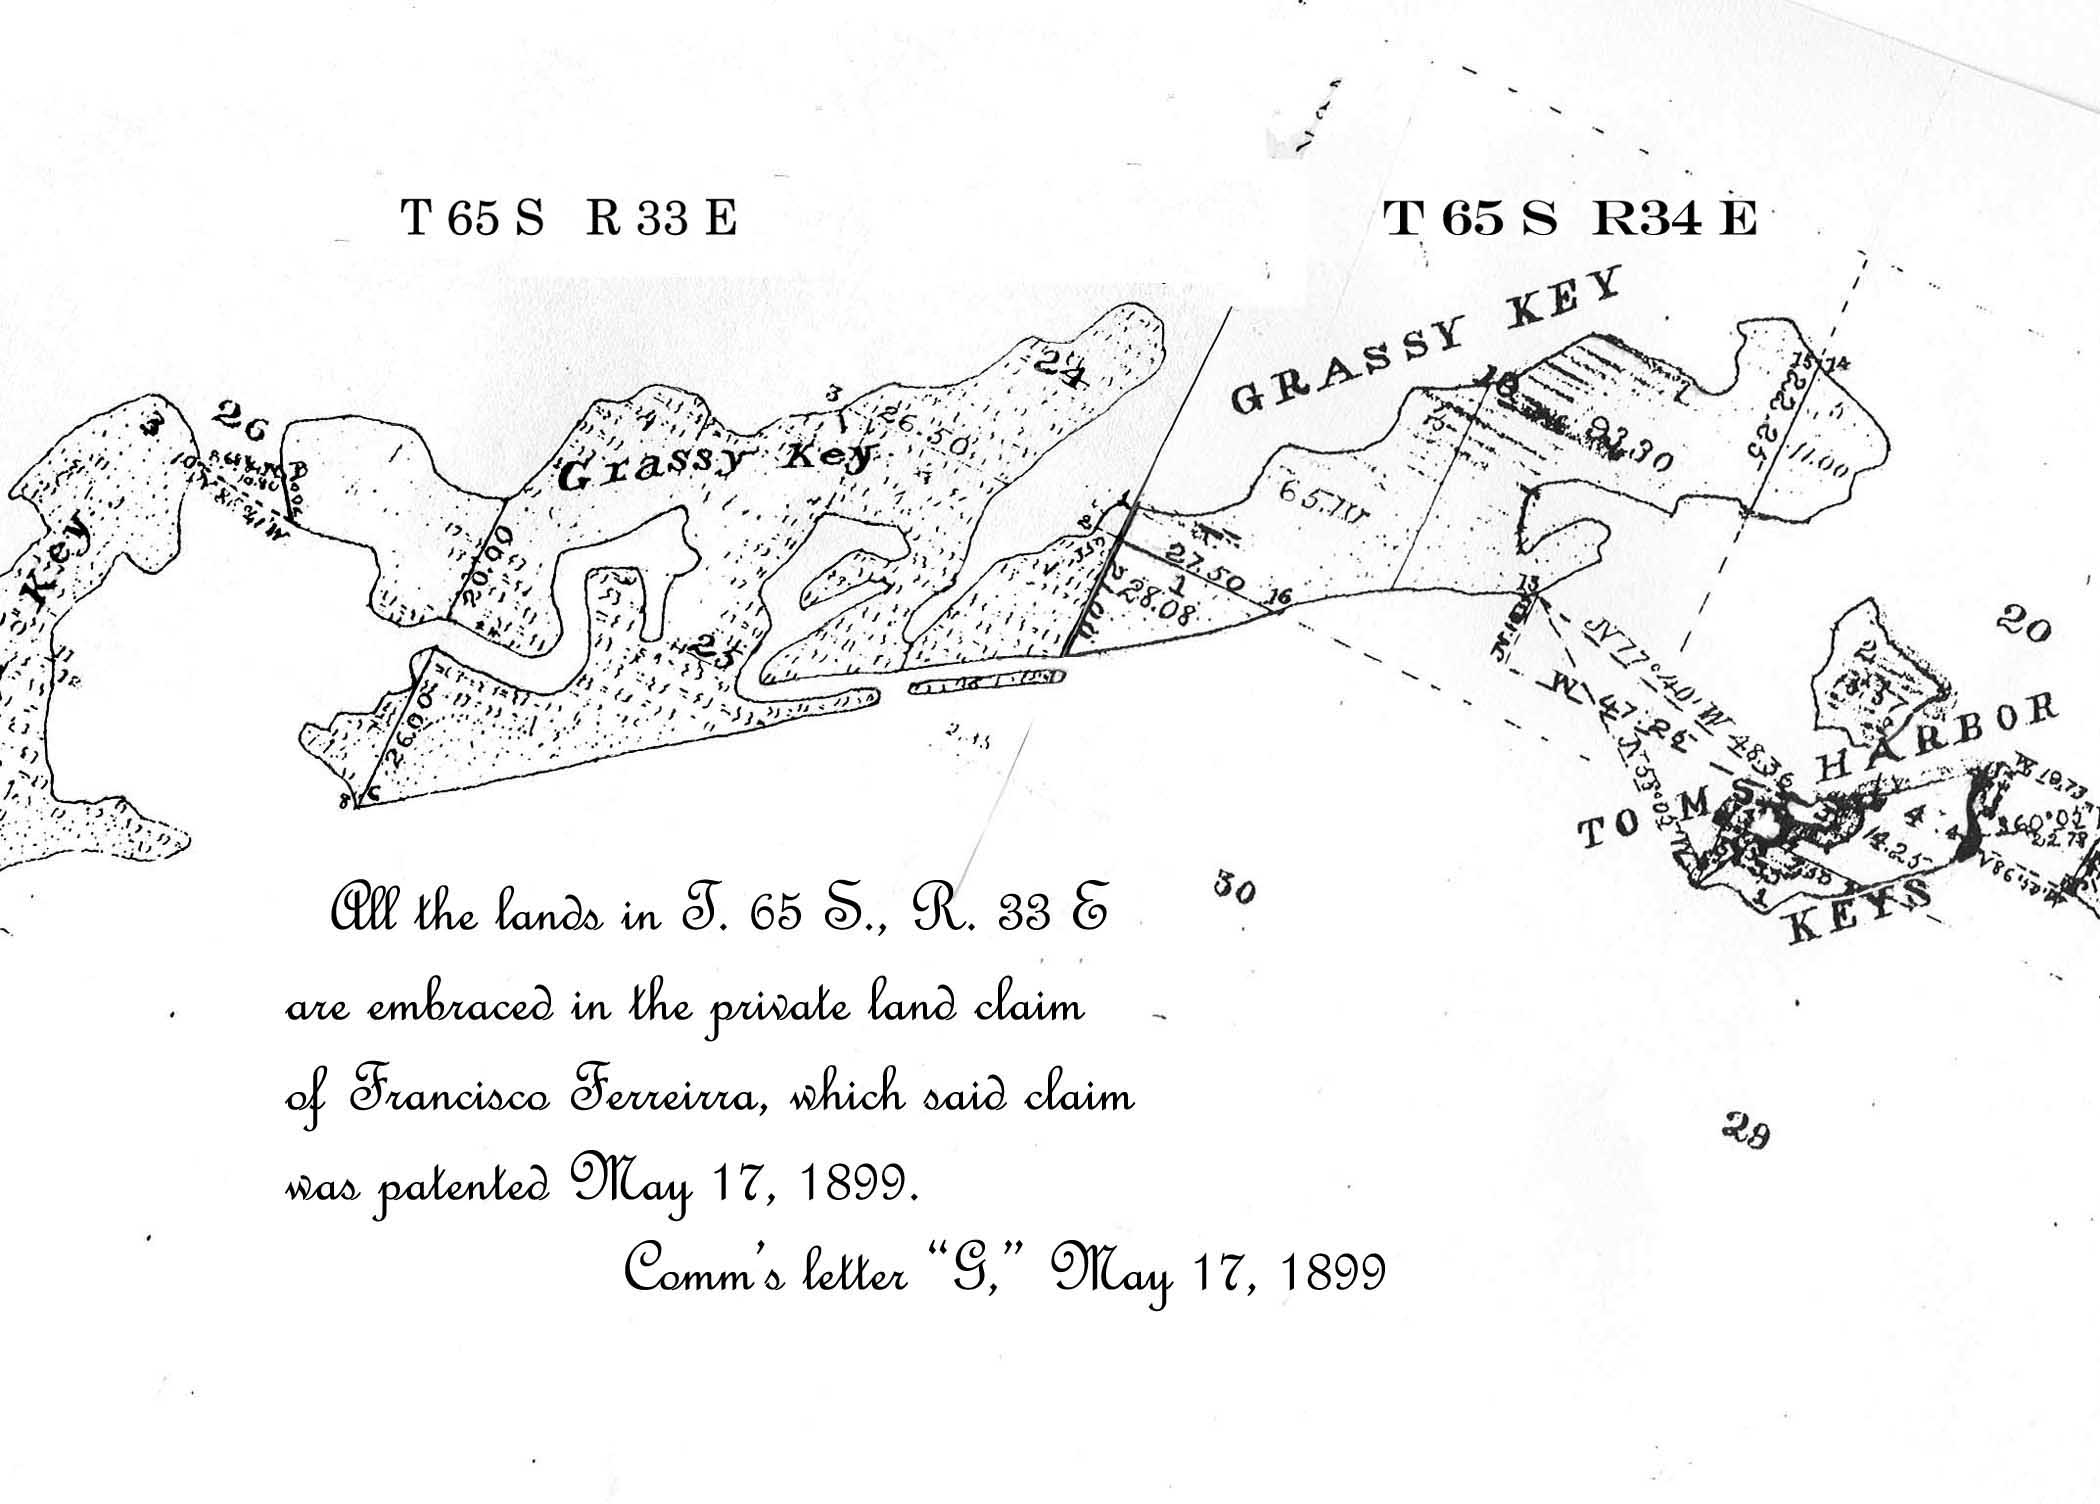 Chas. Smith's first Florida survey map 1874